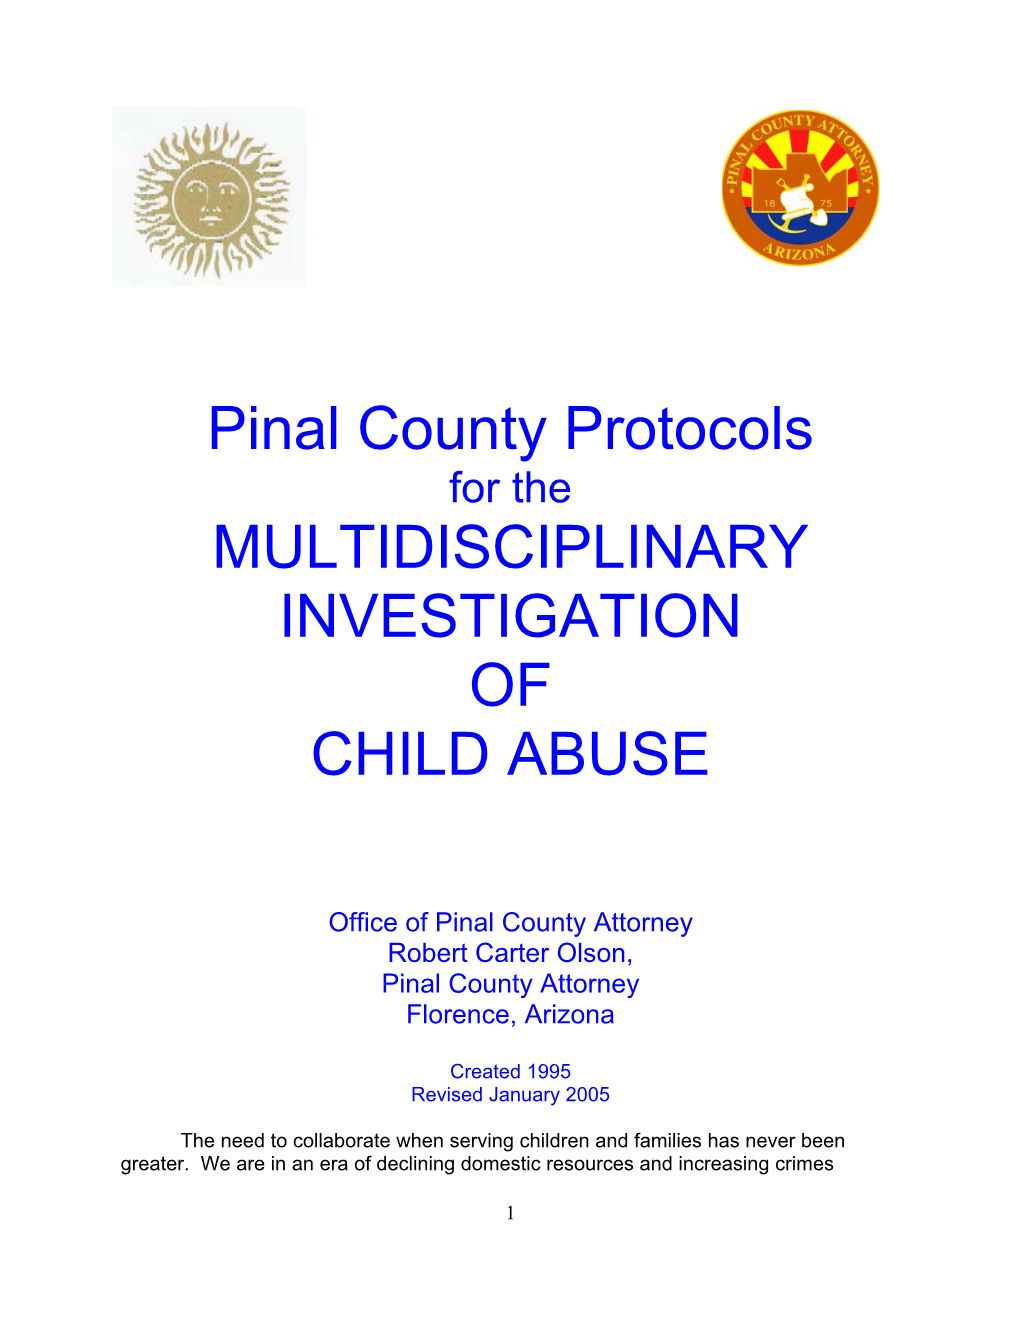 Pinal County Protocols for the MULTIDISCIPLINARY INVESTIGATION of CHILD ABUSE